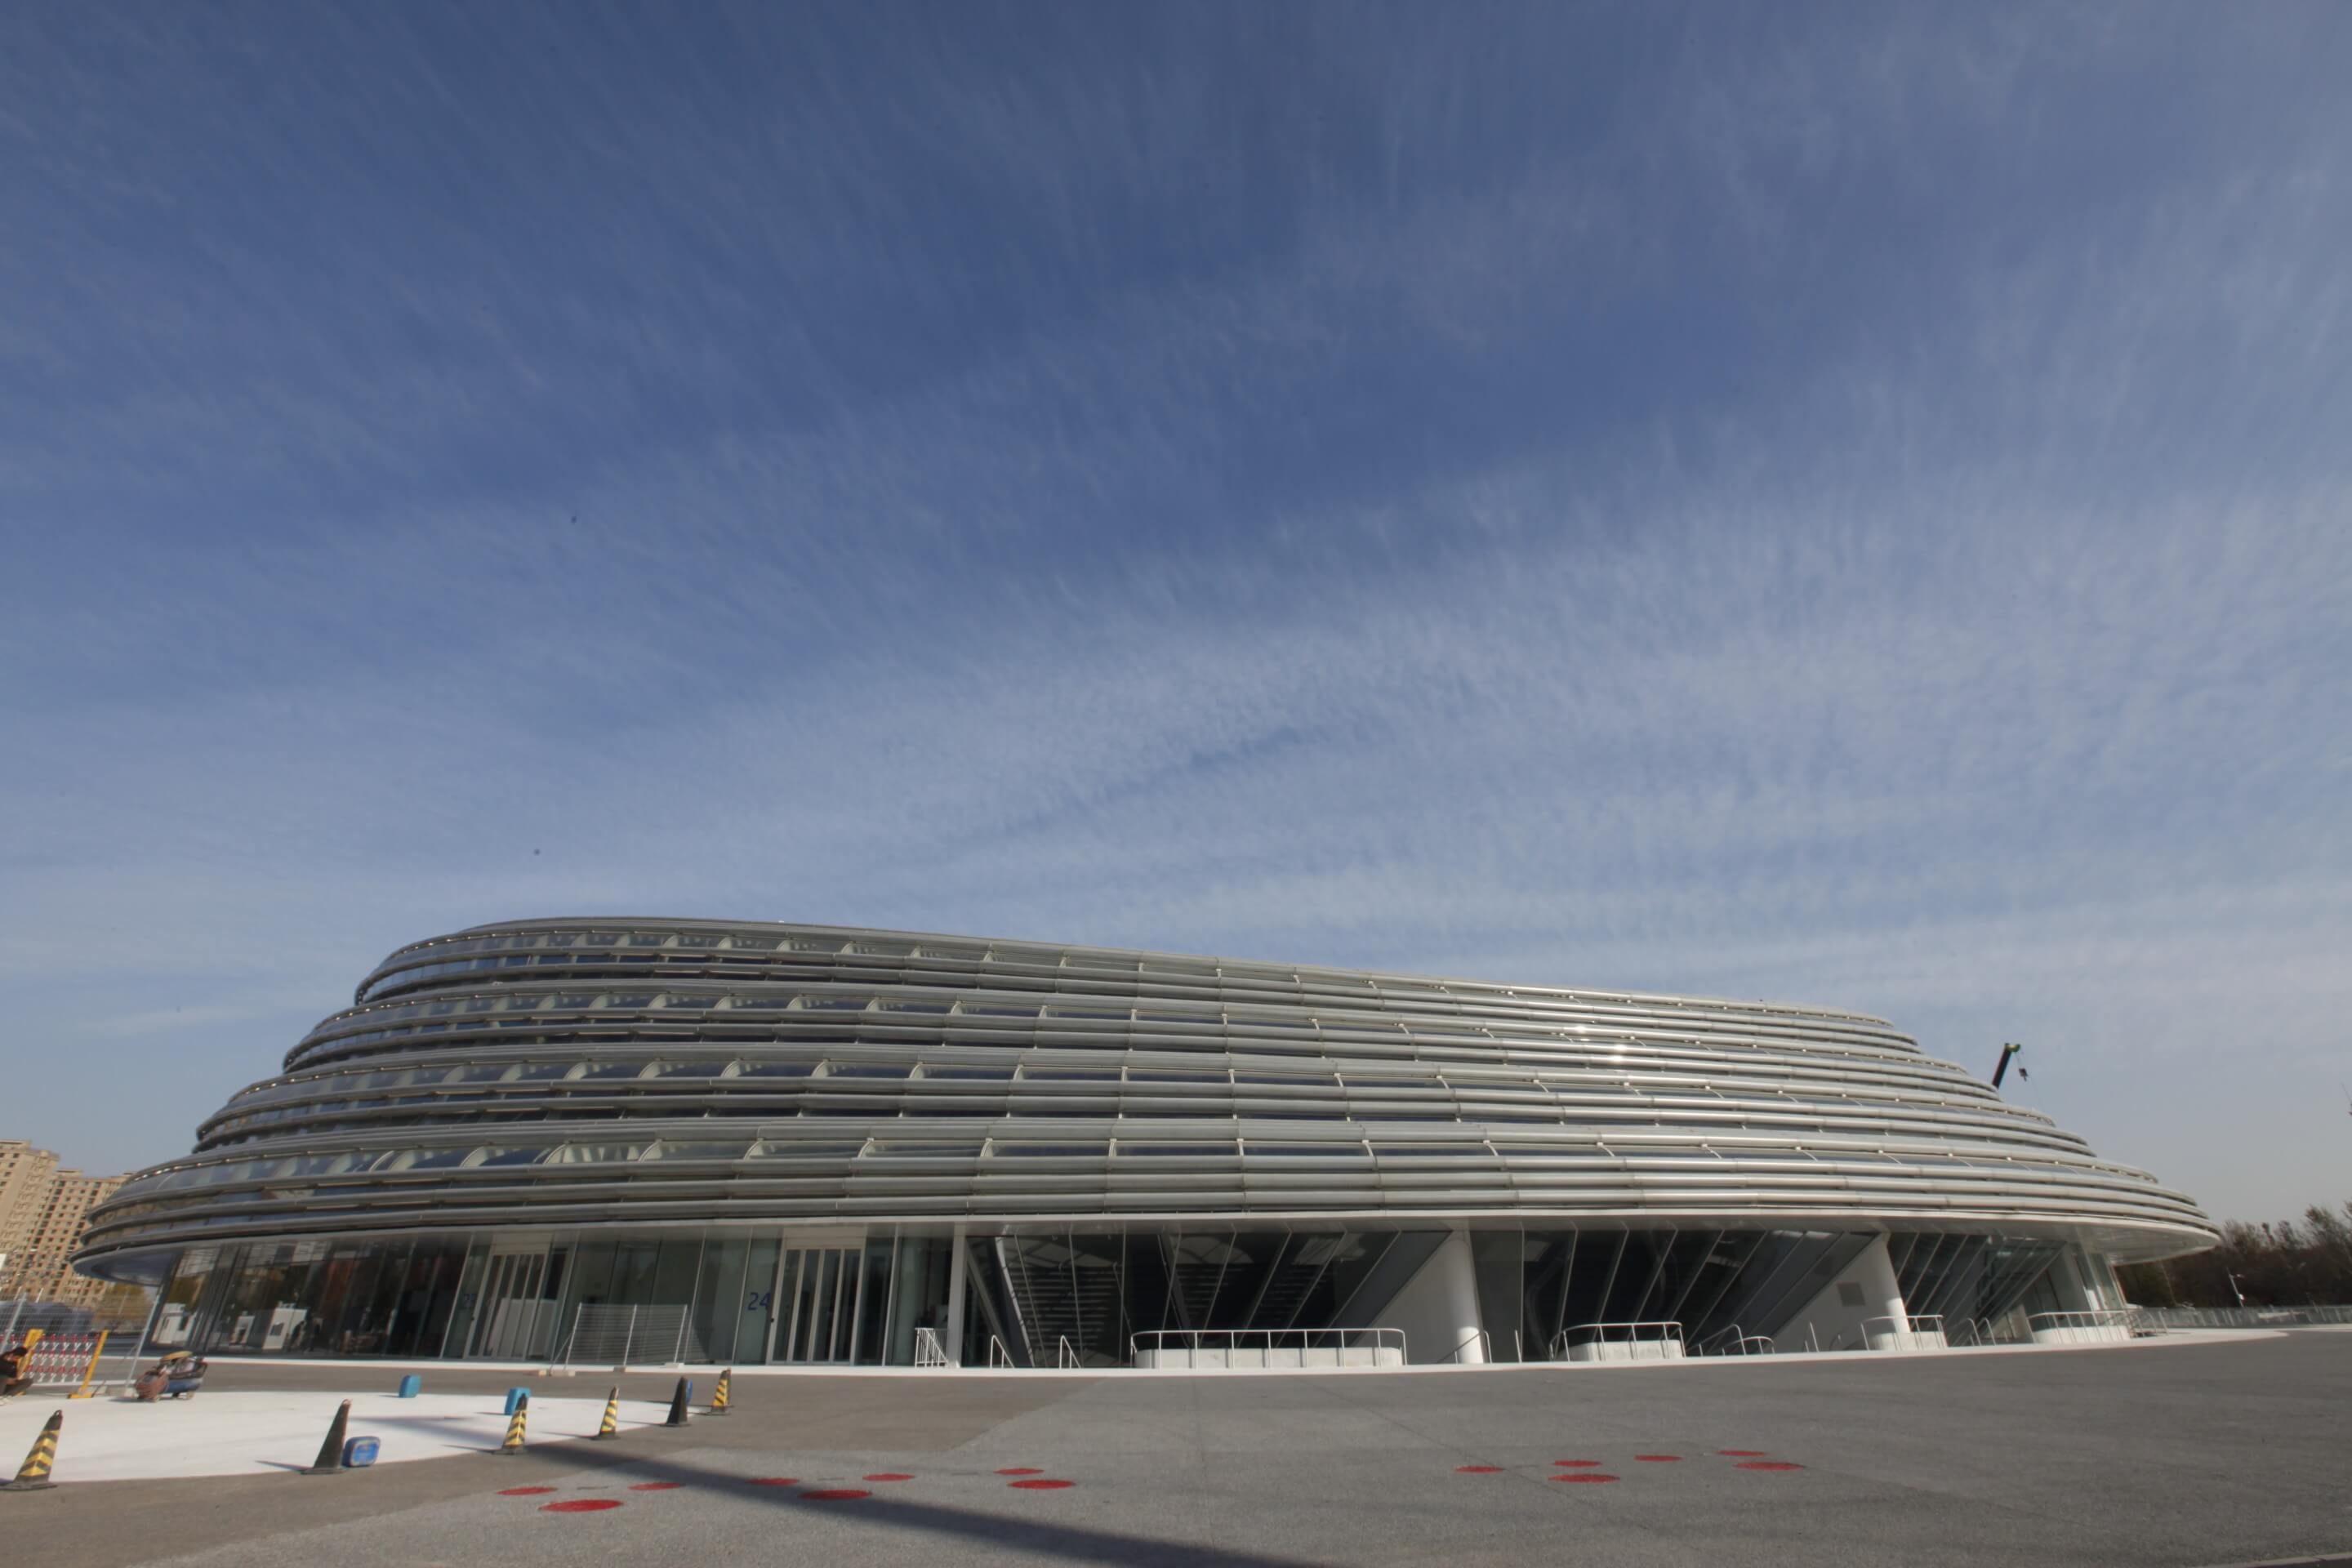 exterior of a discoid-shaped arena with blue skies